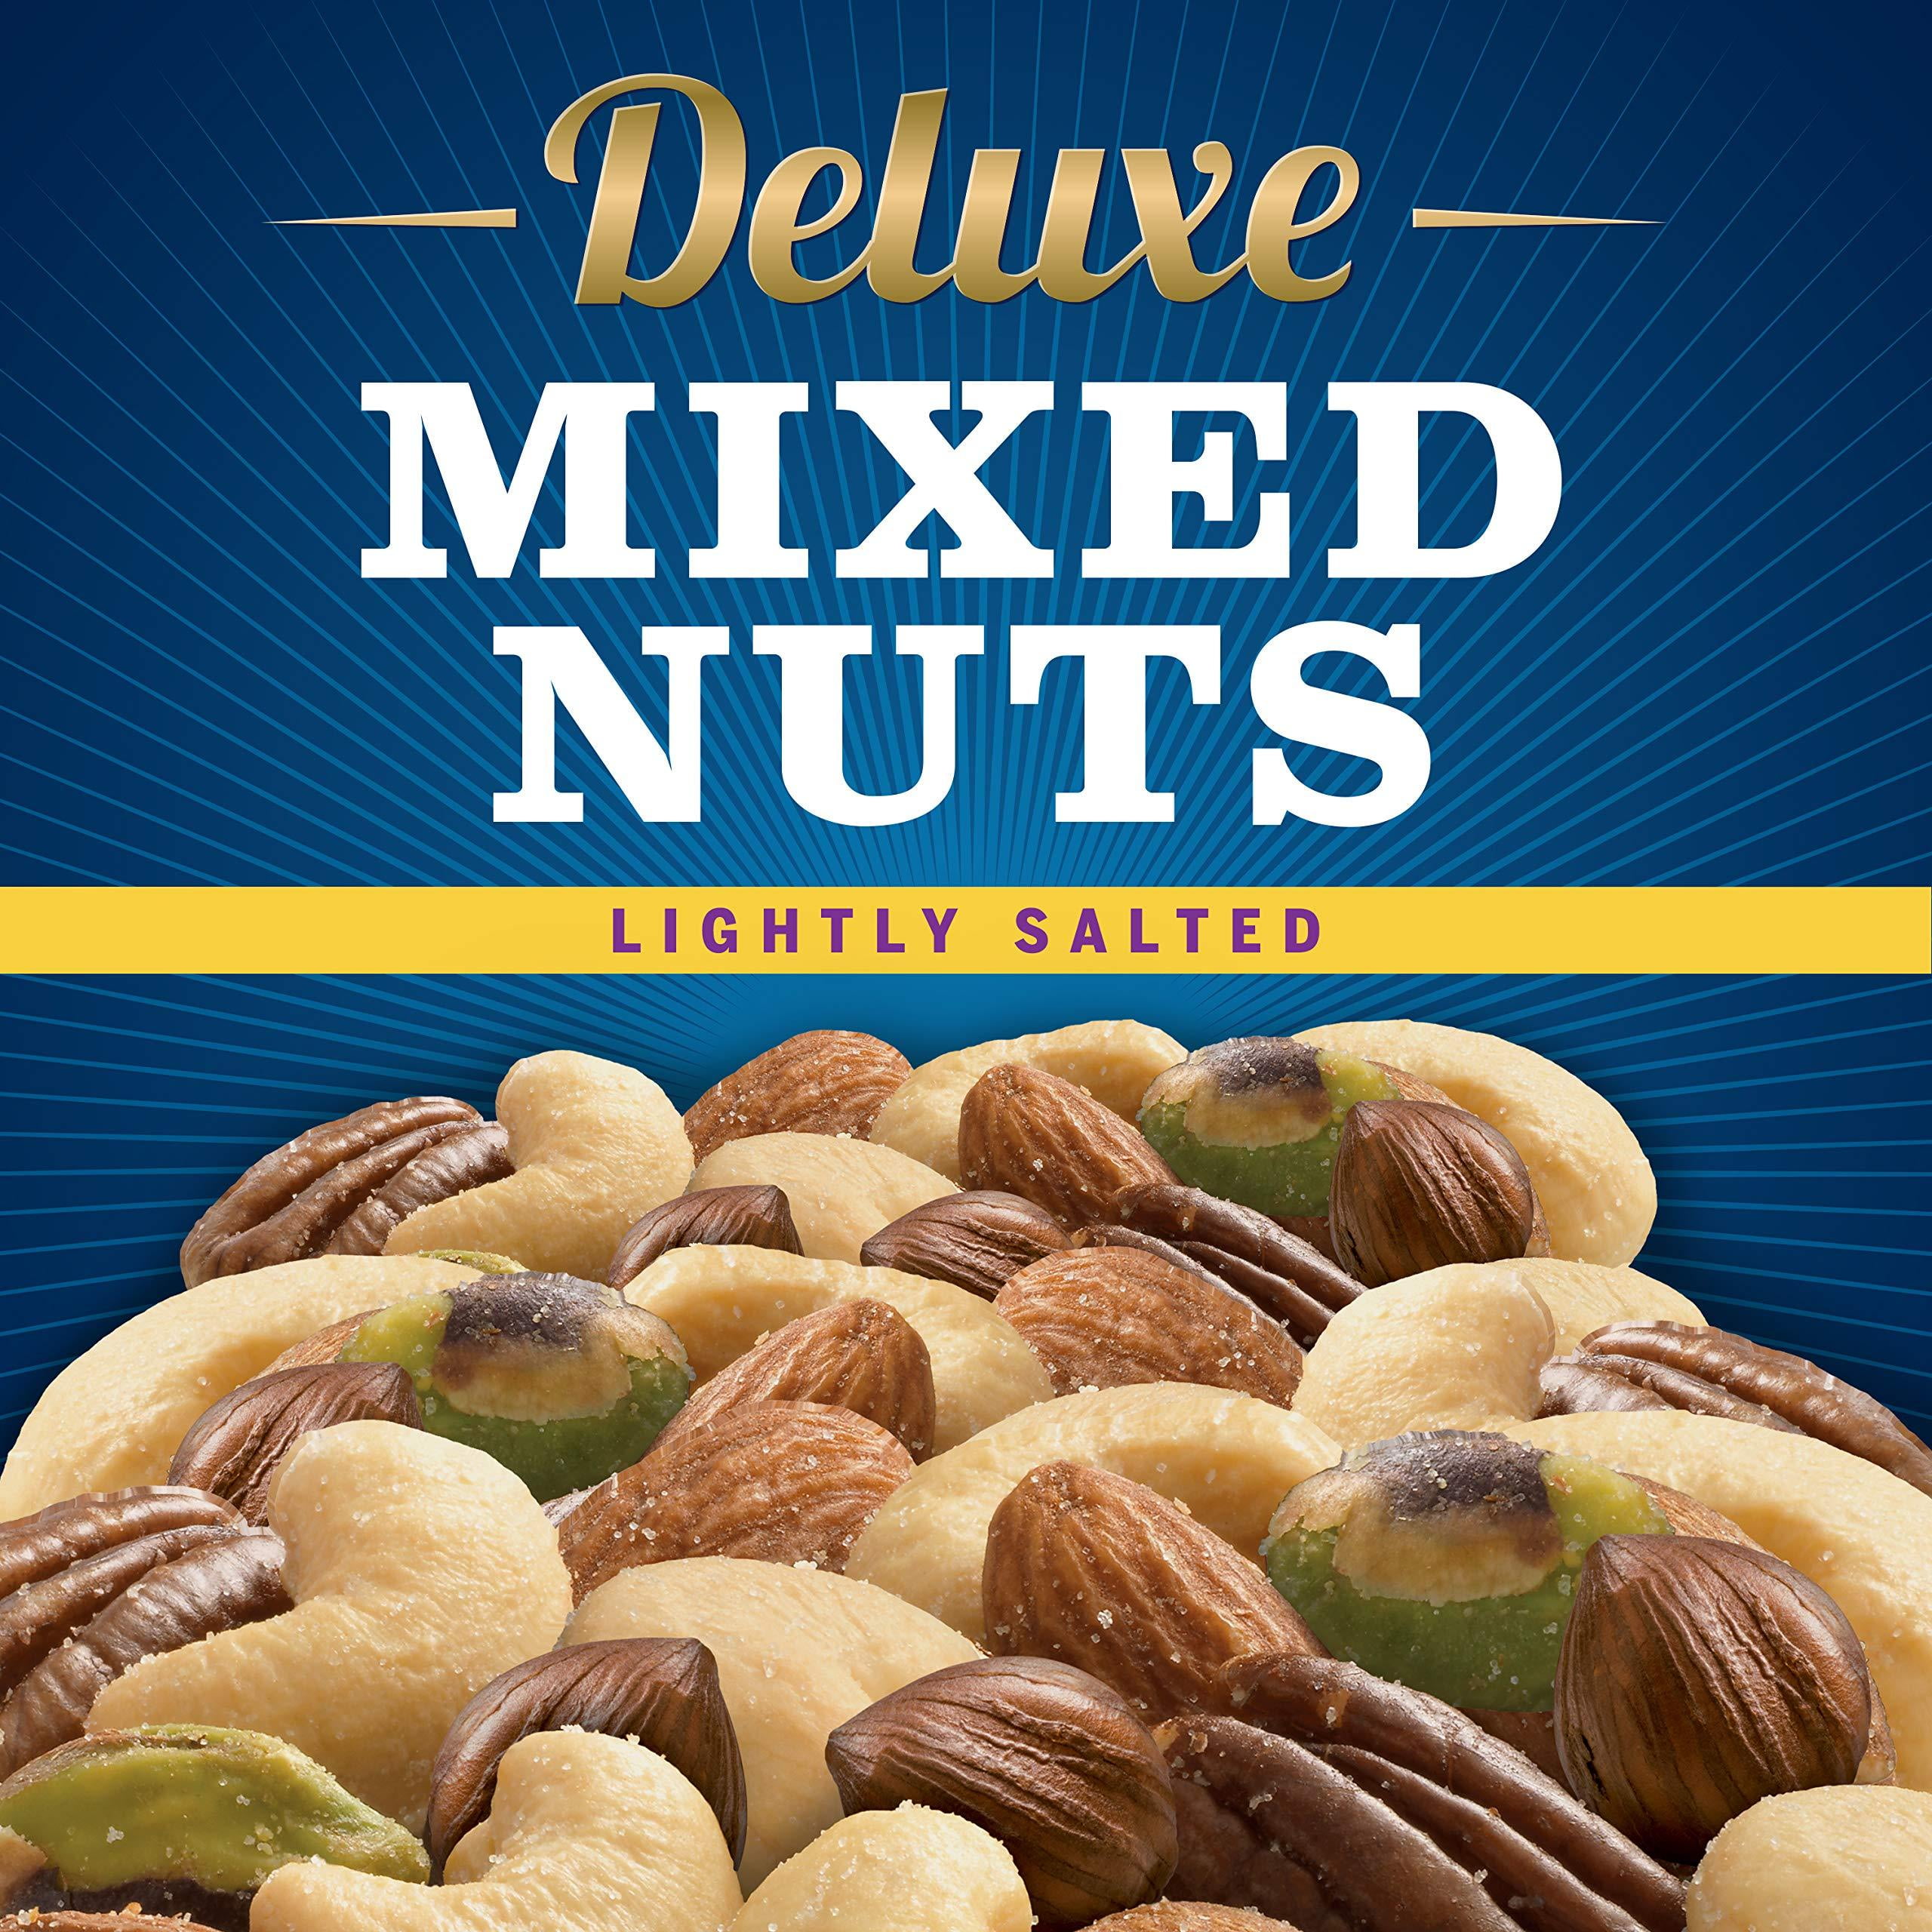 PLANTERS Deluxe Lightly Salted Mixed Nuts, 15.25 oz. Resealable Container -  Reduced Sodium Mixed Nuts with Cashews, Almonds, Hazelnuts, Pistachios &  Pecans - Vegan Snacks, Kosher 15.25 Ounce (Pack of 